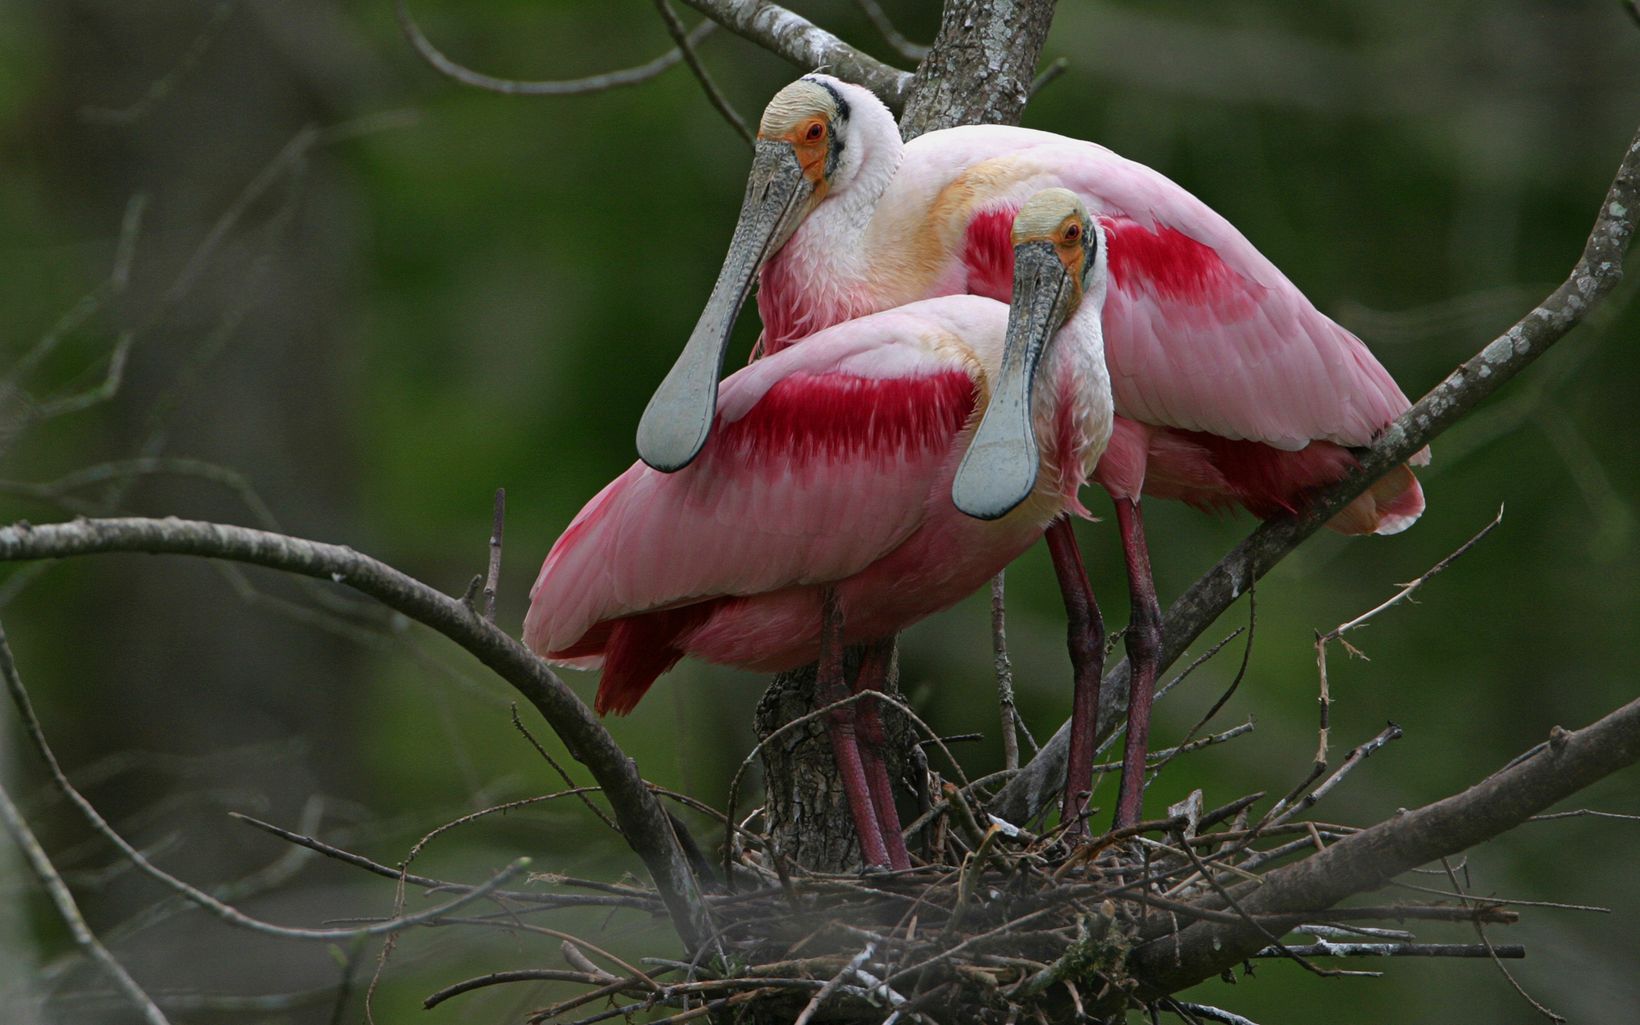 Two pink birds with wide flat bills rest on a branch.